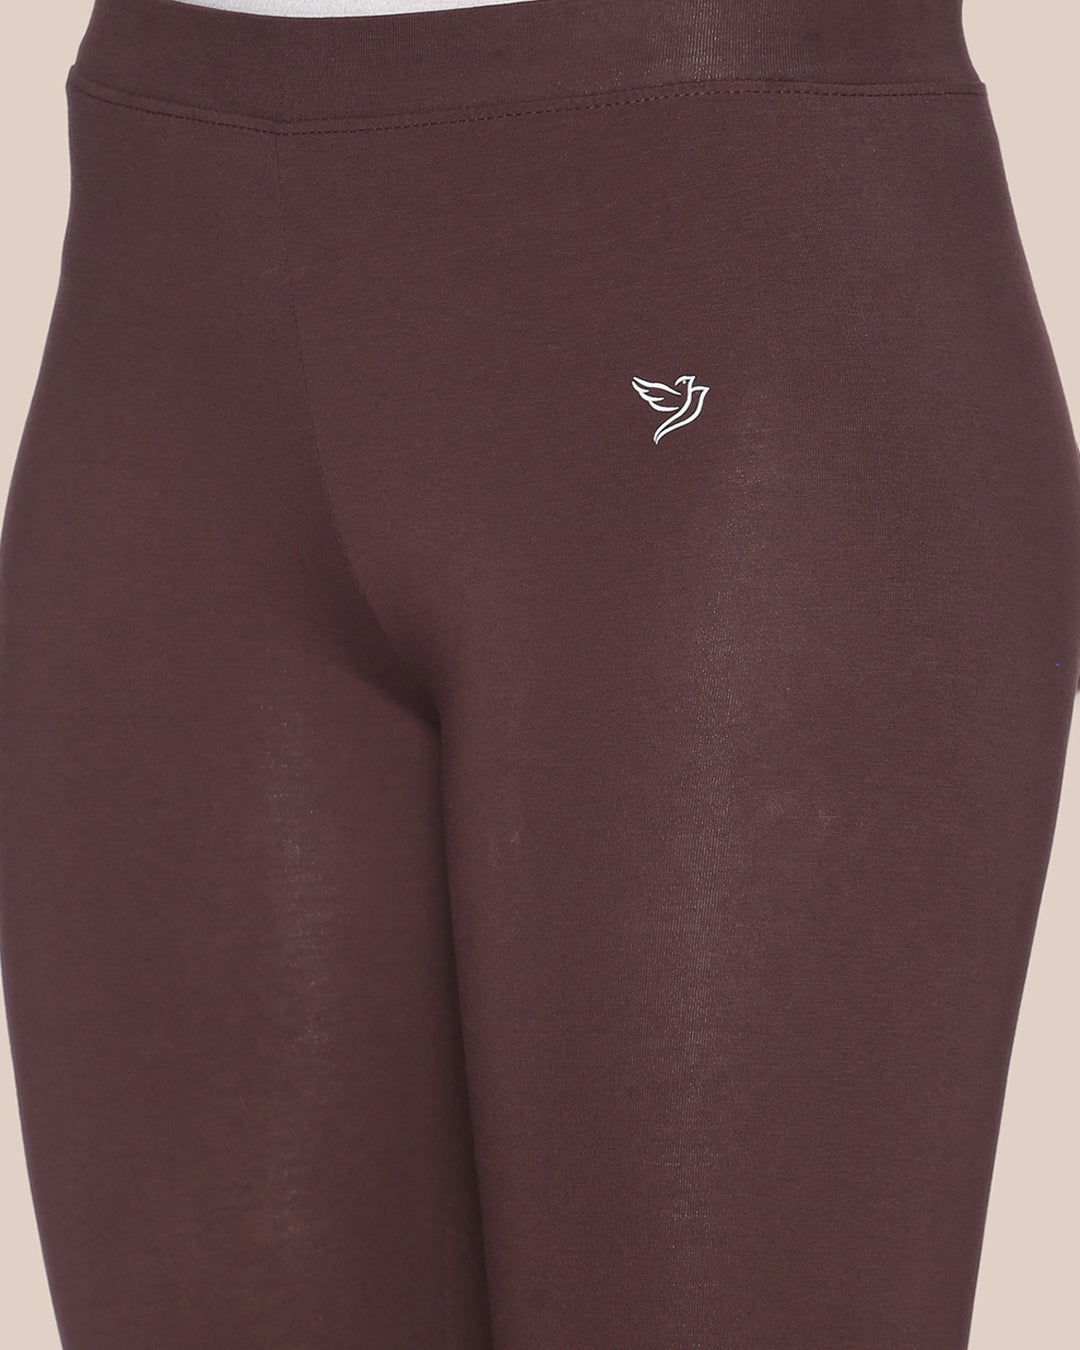 Burgandy Cotton Ankle Legging for College girls